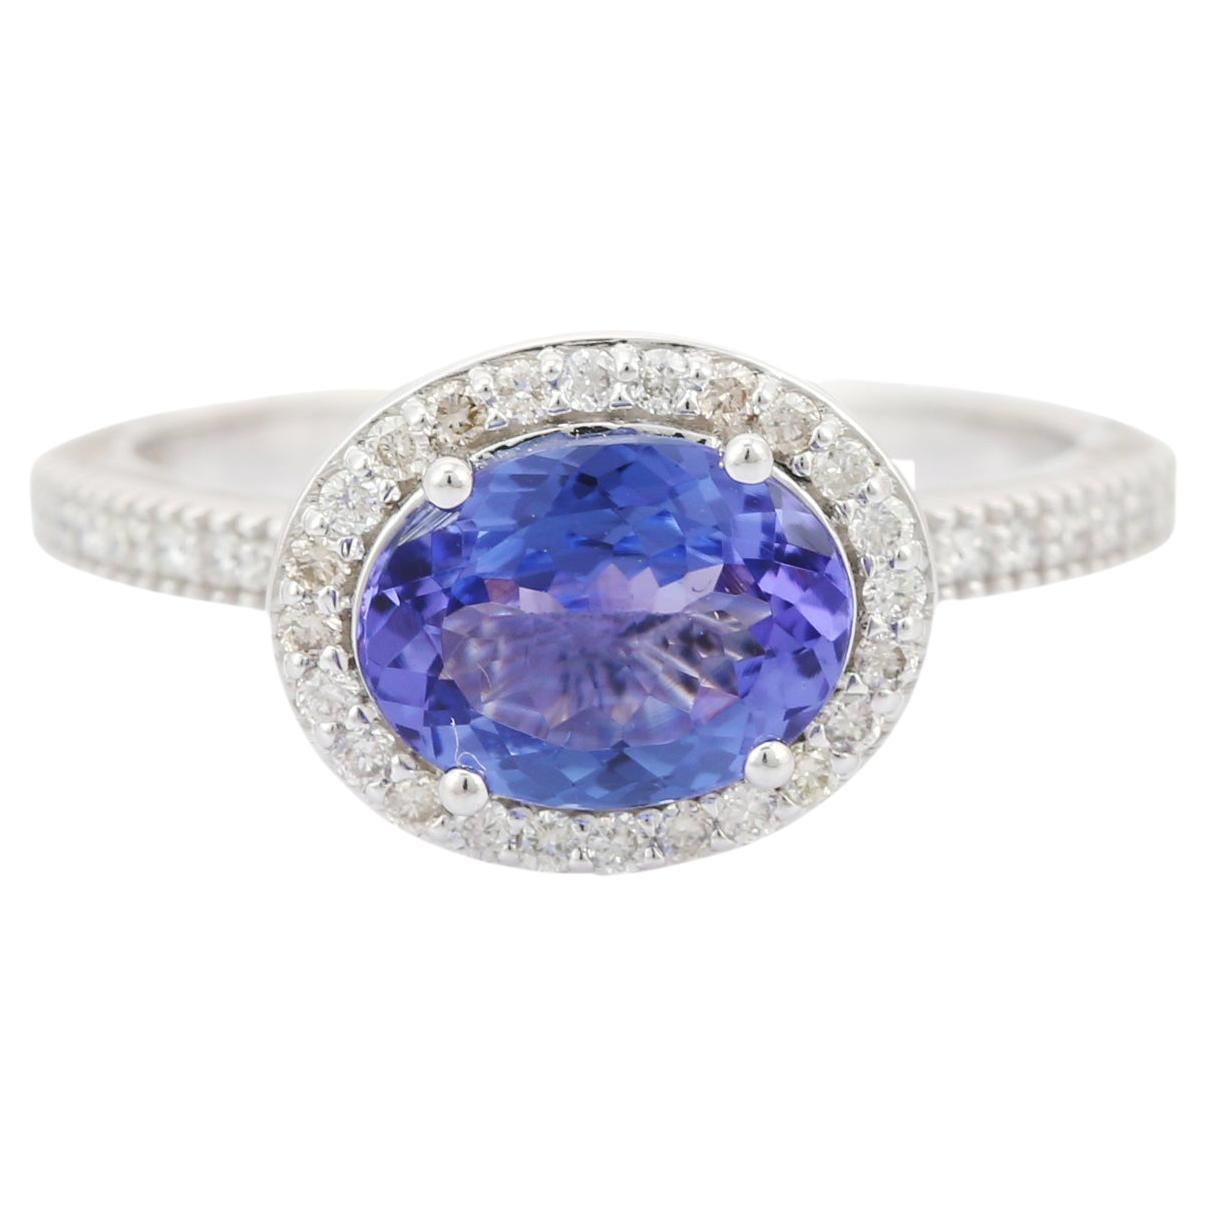 Oval Shaped Tanzanite and Diamond Ring in 18K White Gold